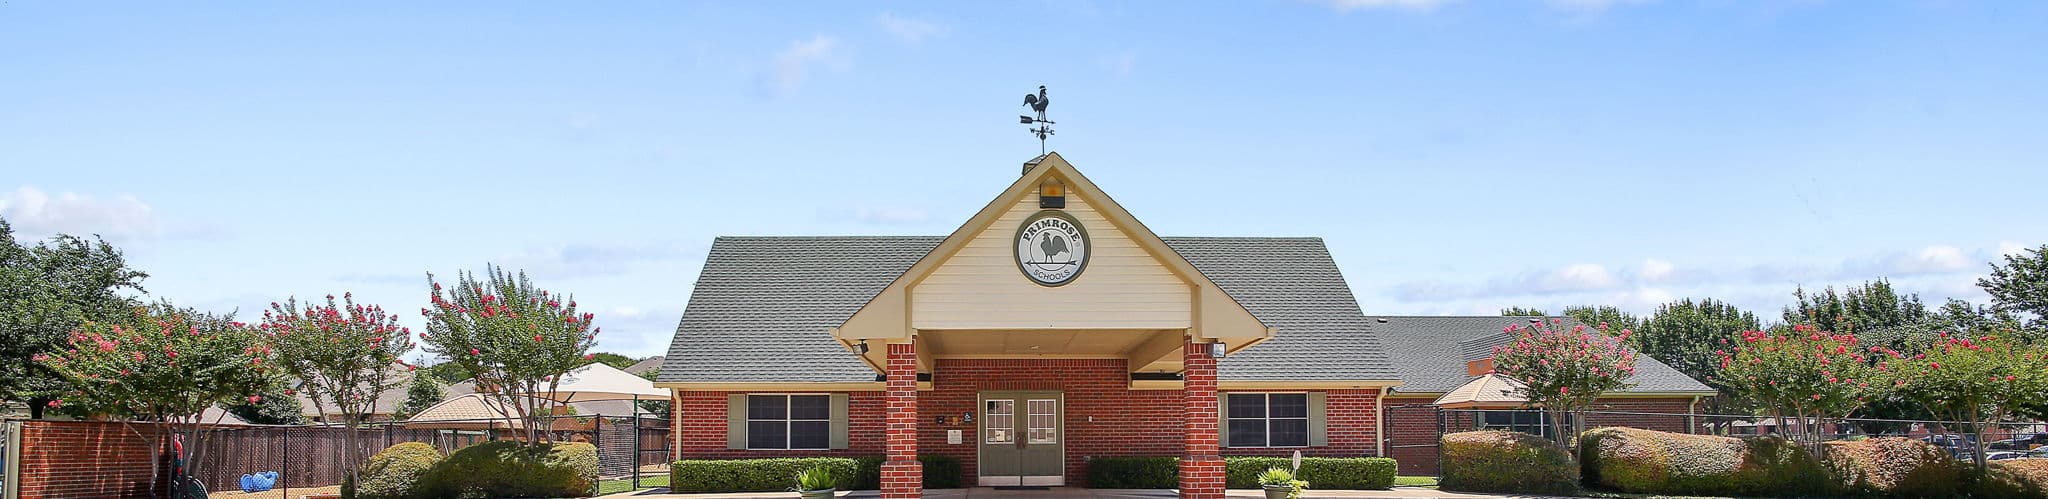 Exterior of a Primrose School of Grapevine Colleyville